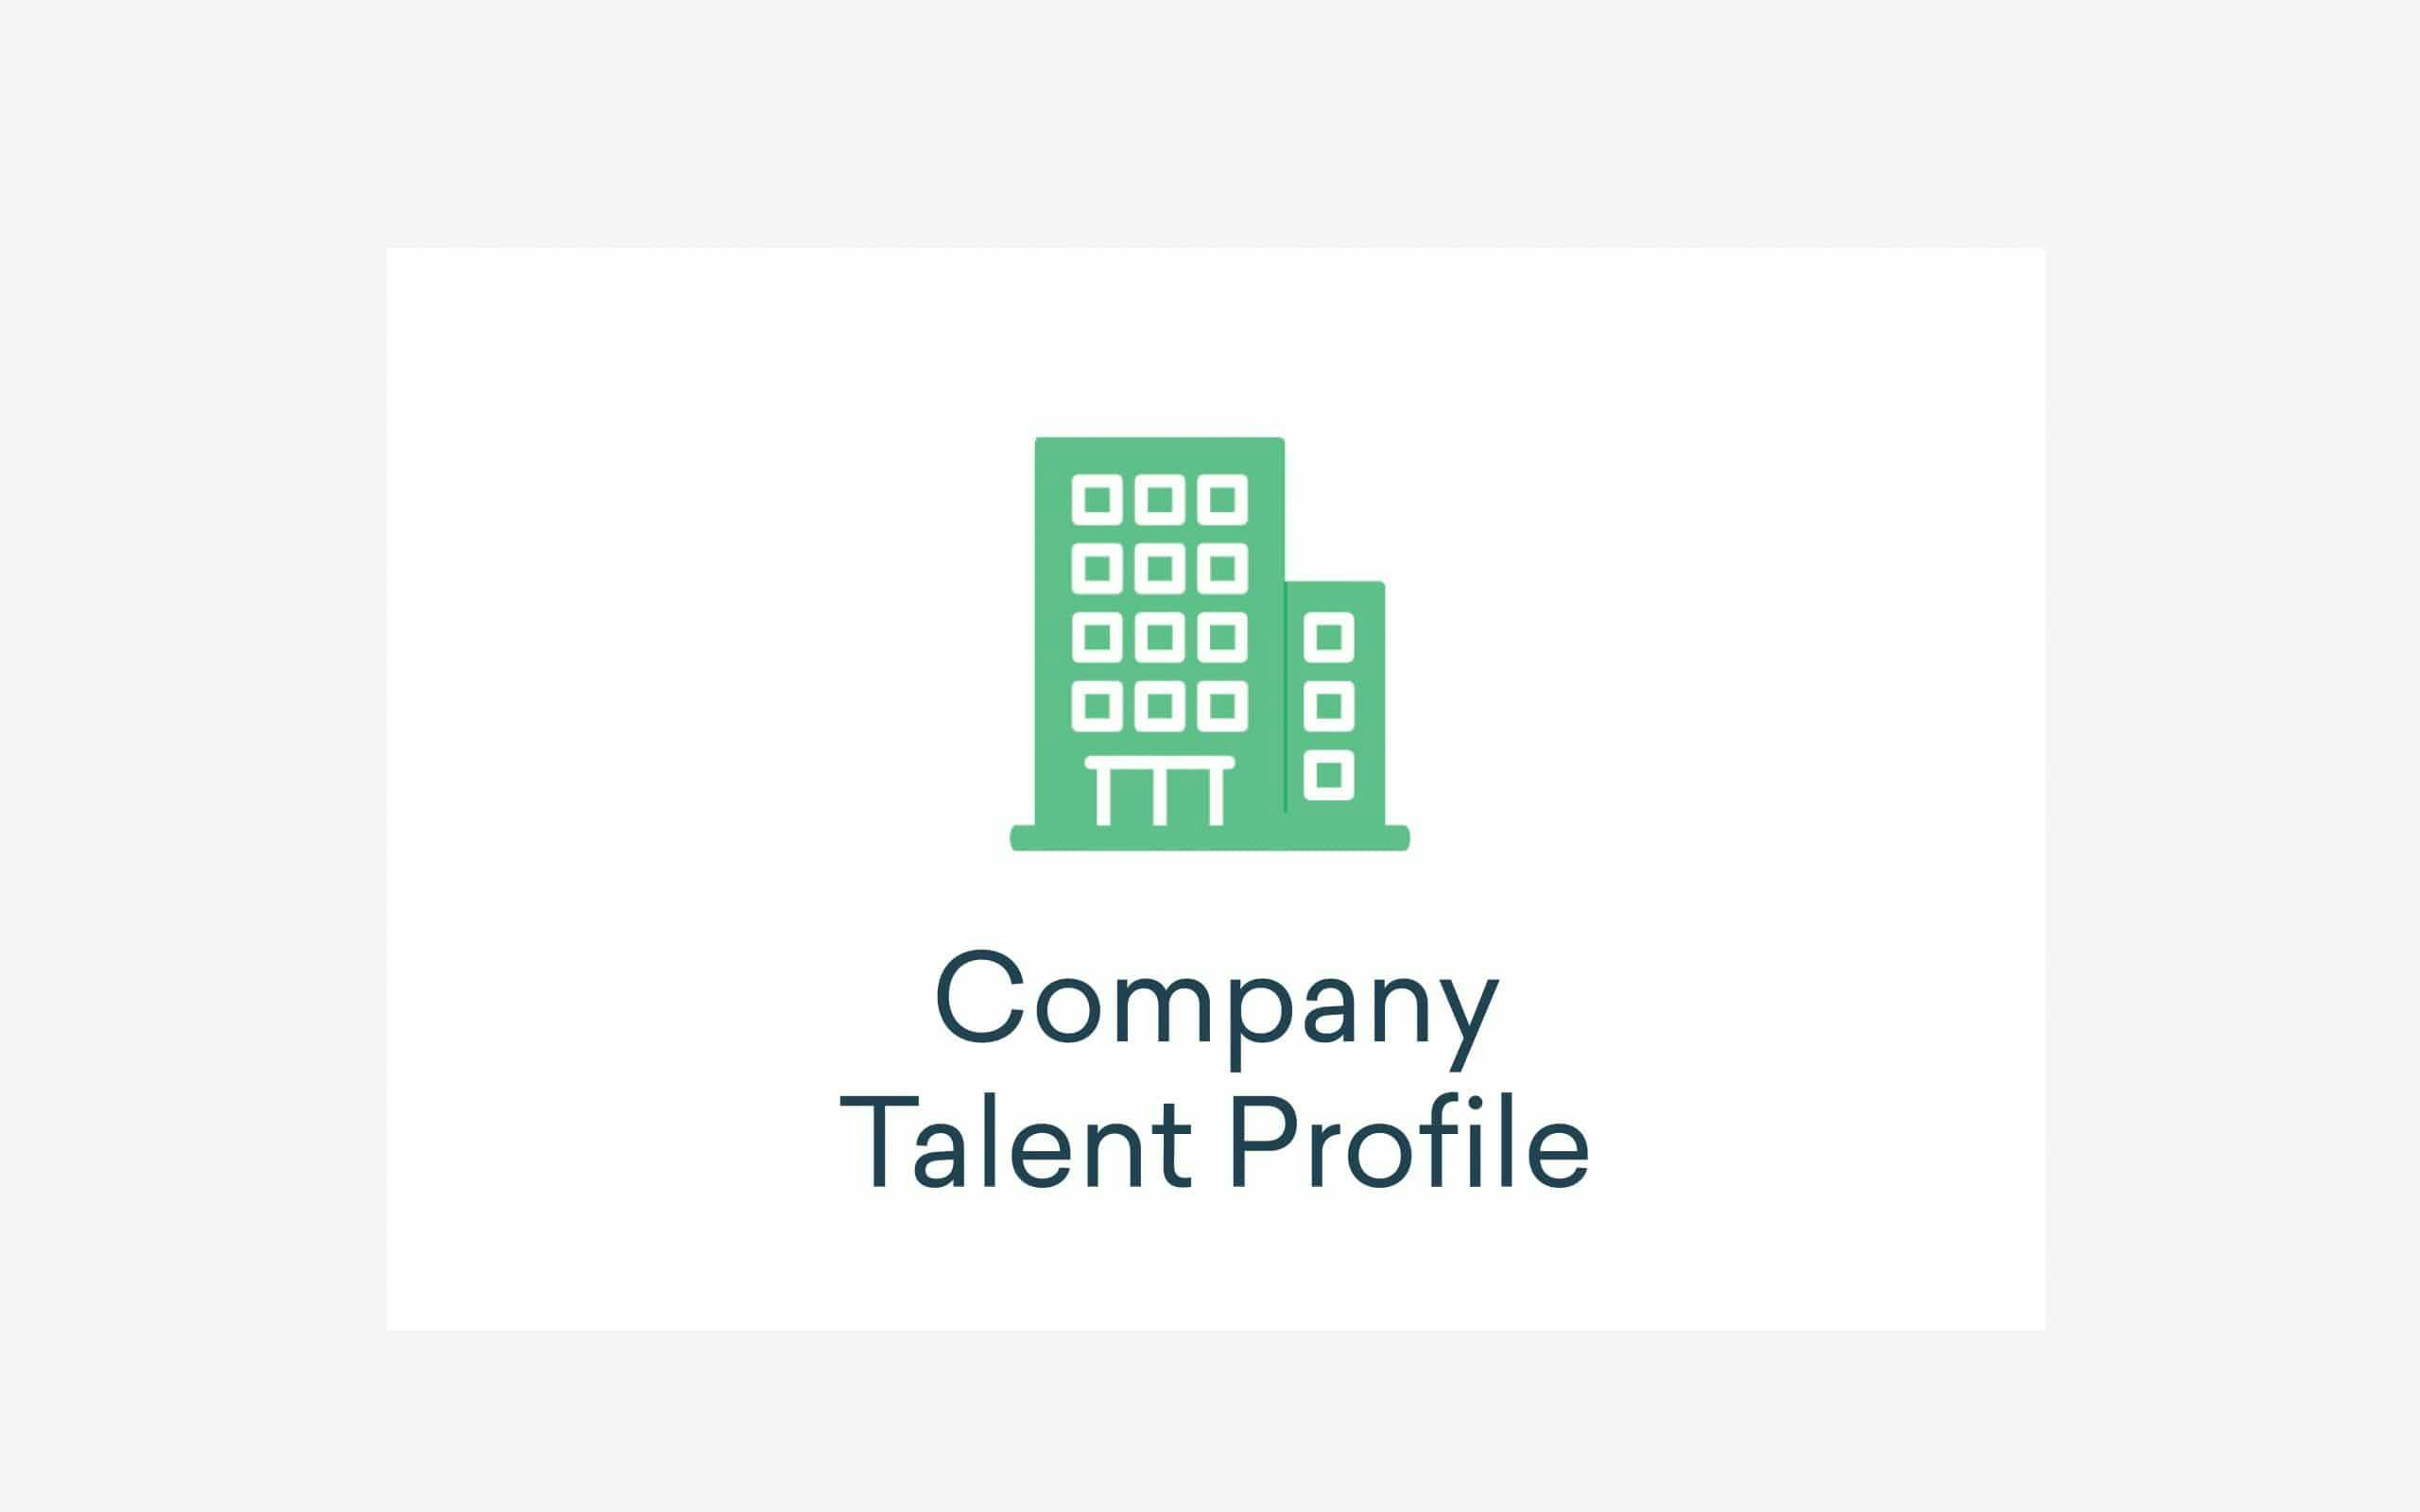 Meeting Prep Made Easy With the NEW Company Talent Profile